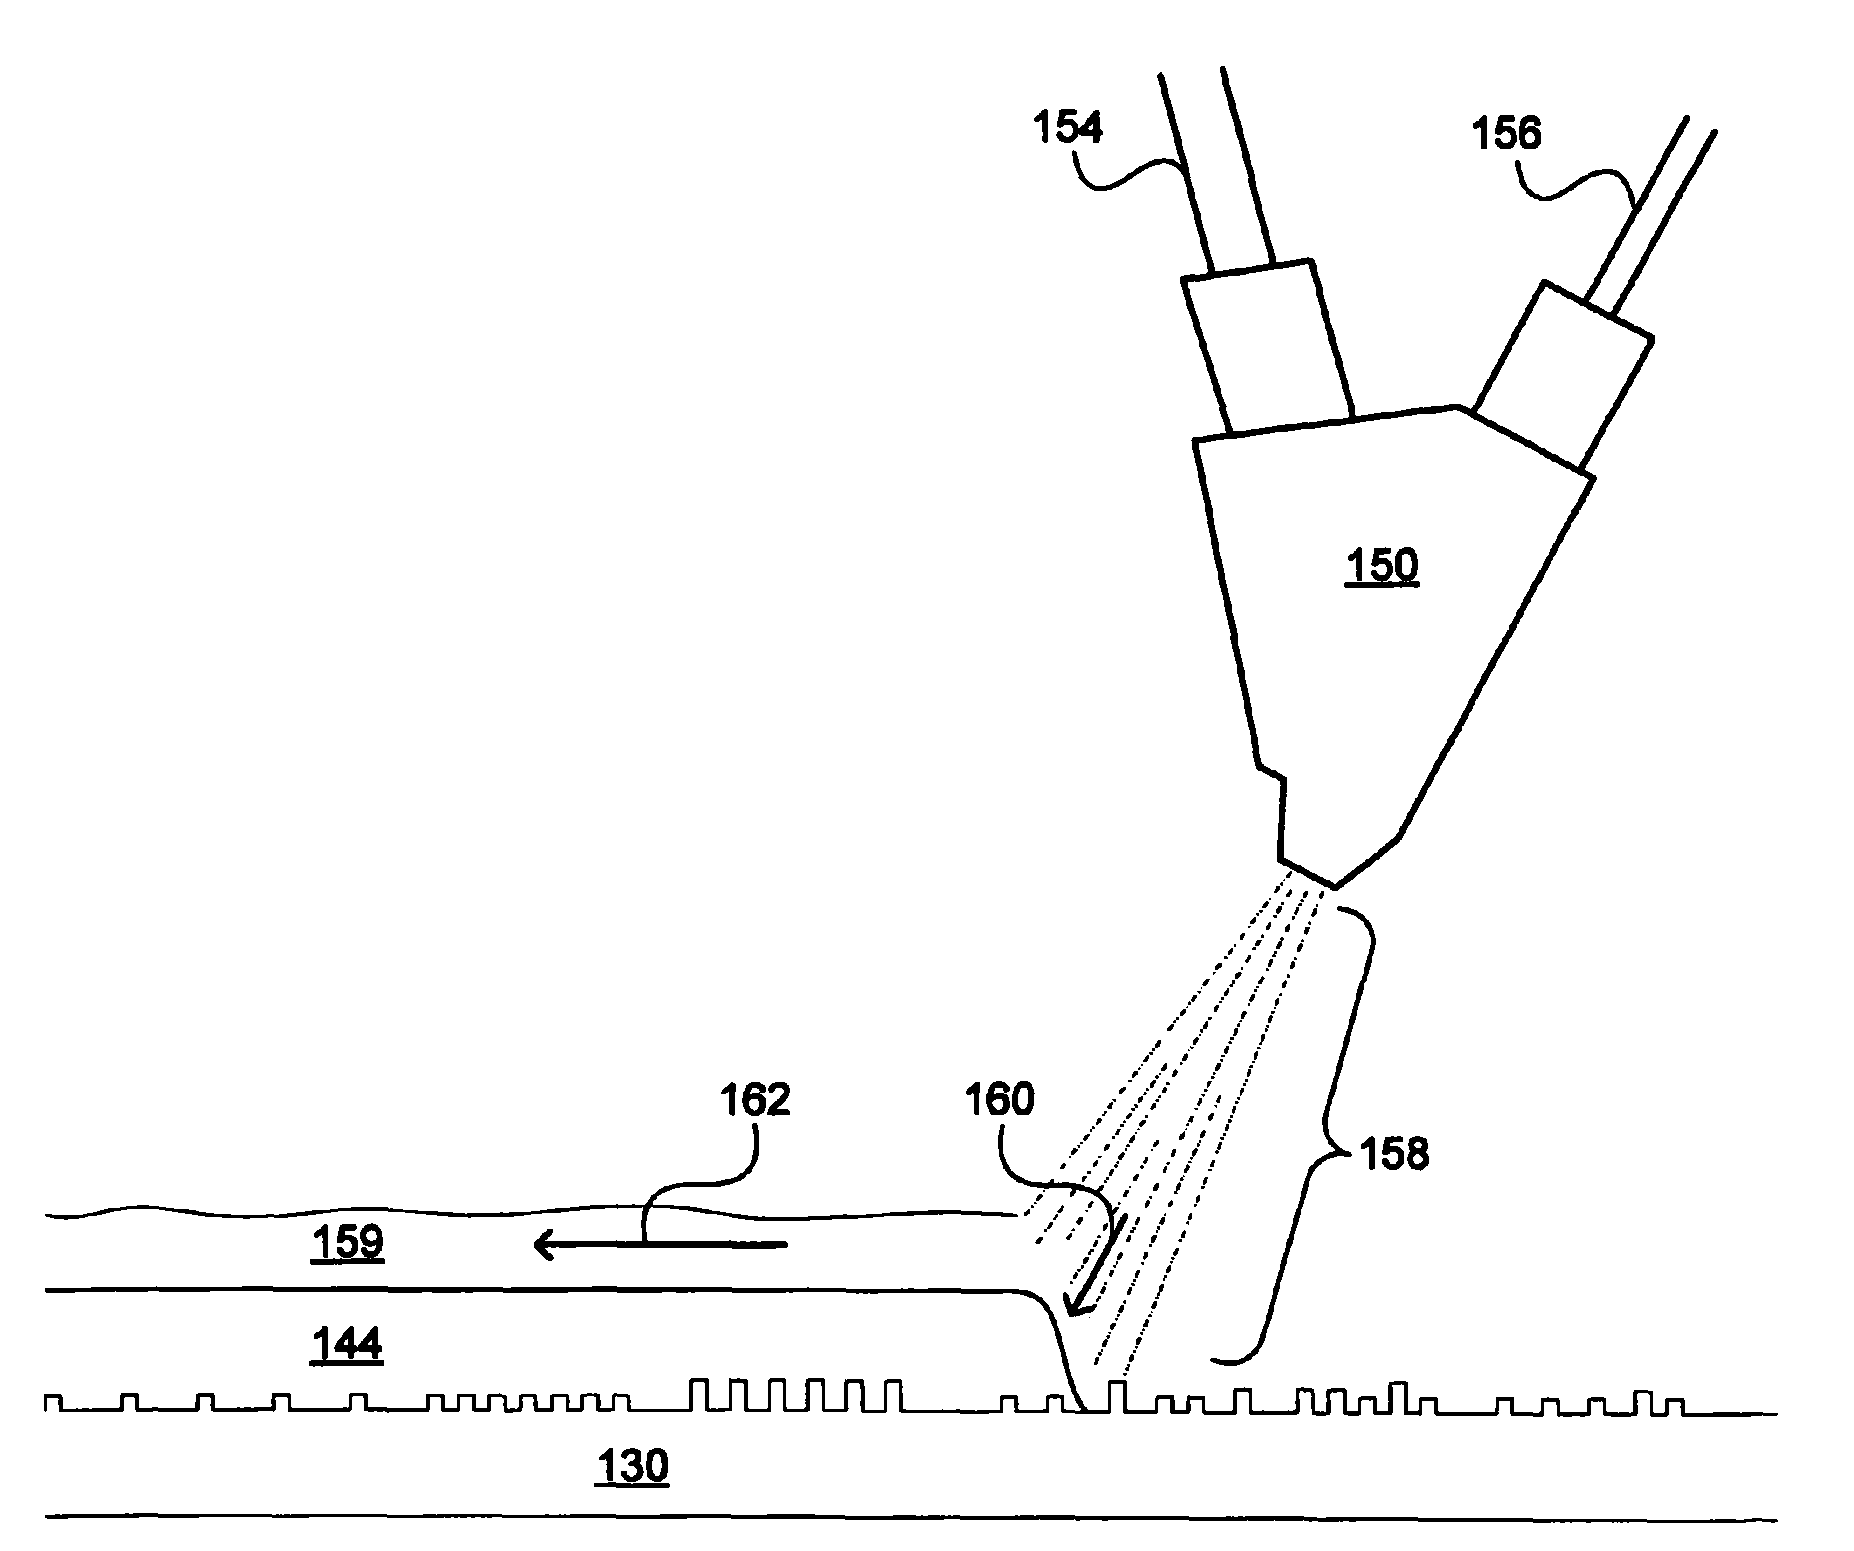 Method of particle contaminant removal